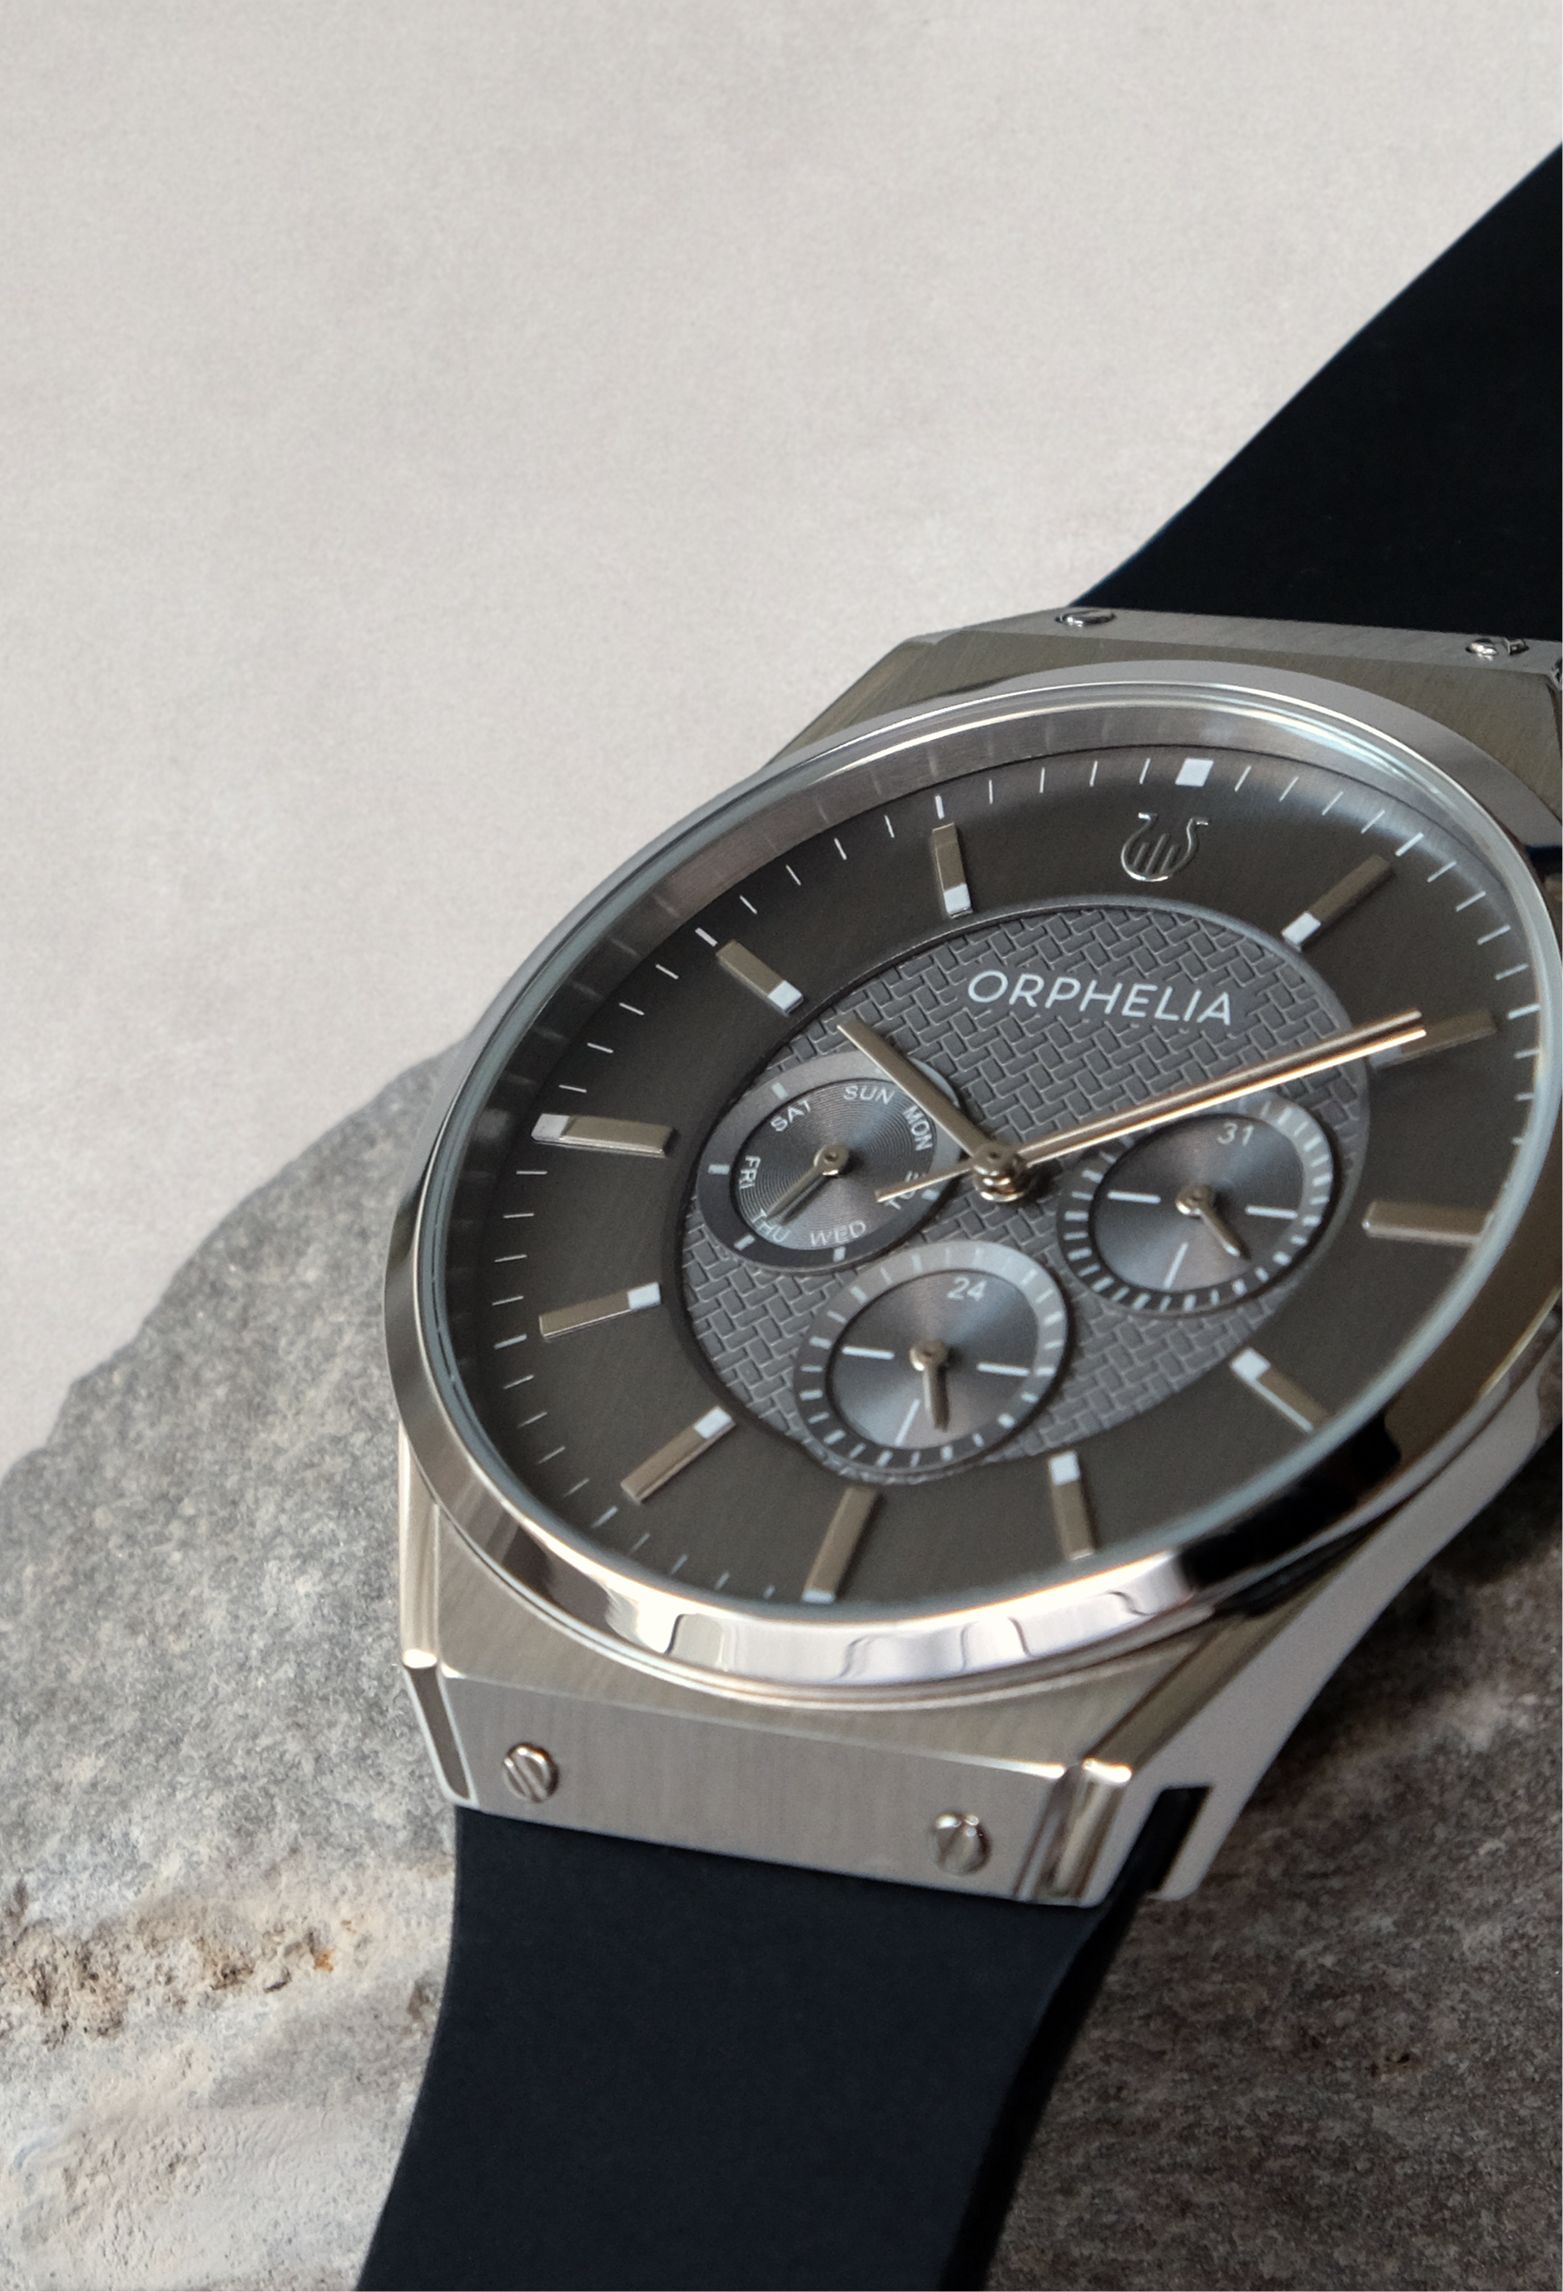 This Orphelia Saffiano Multi Dial Watch for Men is the perfect timepiece to wear or to gift. It's Silver 41 mm Round case combined with the comfortable Black Genuine Leather watch band will ensure you enjoy this stunning timepiece without any compromise. Operated by a high quality Quartz movement and water resistant to 3 bars, your watch will keep ticking. GREAT DESIGN: ORPHELIA Saffiano Multi dial watch with a Miyota Quartz movement includes a date display and has a very comfortable genuine leather strap. This watch features a 24 hour display. perfect for parties, date nights and wearing in the office. PREMIUM QUALITY: By using high-quality materials  Glass: Mineral Glass  Case material: Stainless steel  Bracelet material: Leather - Water resistant: 3 bars COMPACT SIZE: Case diameter: 41 mm  Height: 9 mm  Strap- Length: 22 cm  Width: 20 mm. Due to this practical handy size  the watch is absolutely for everyday use-Weight: 61 g